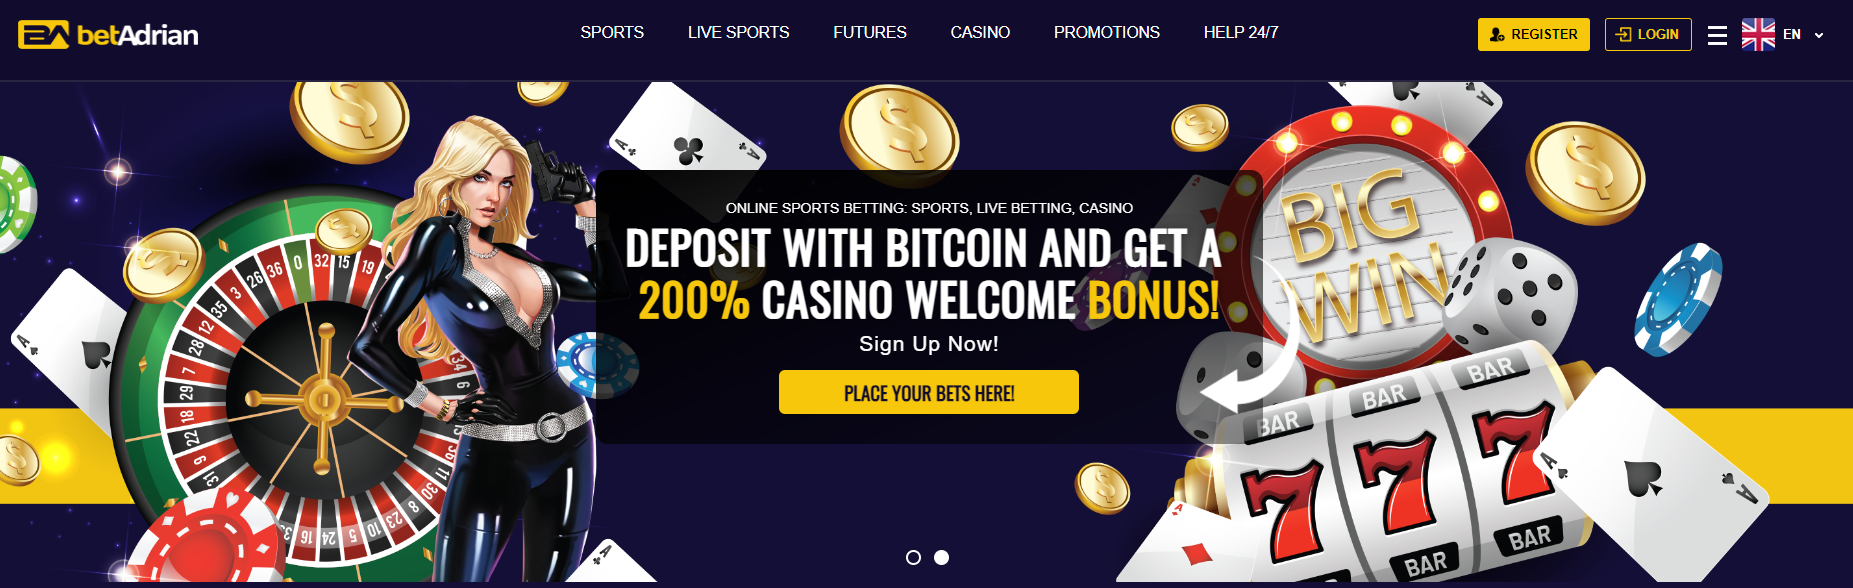 20 Places To Get Deals On Casino With Bitcoin